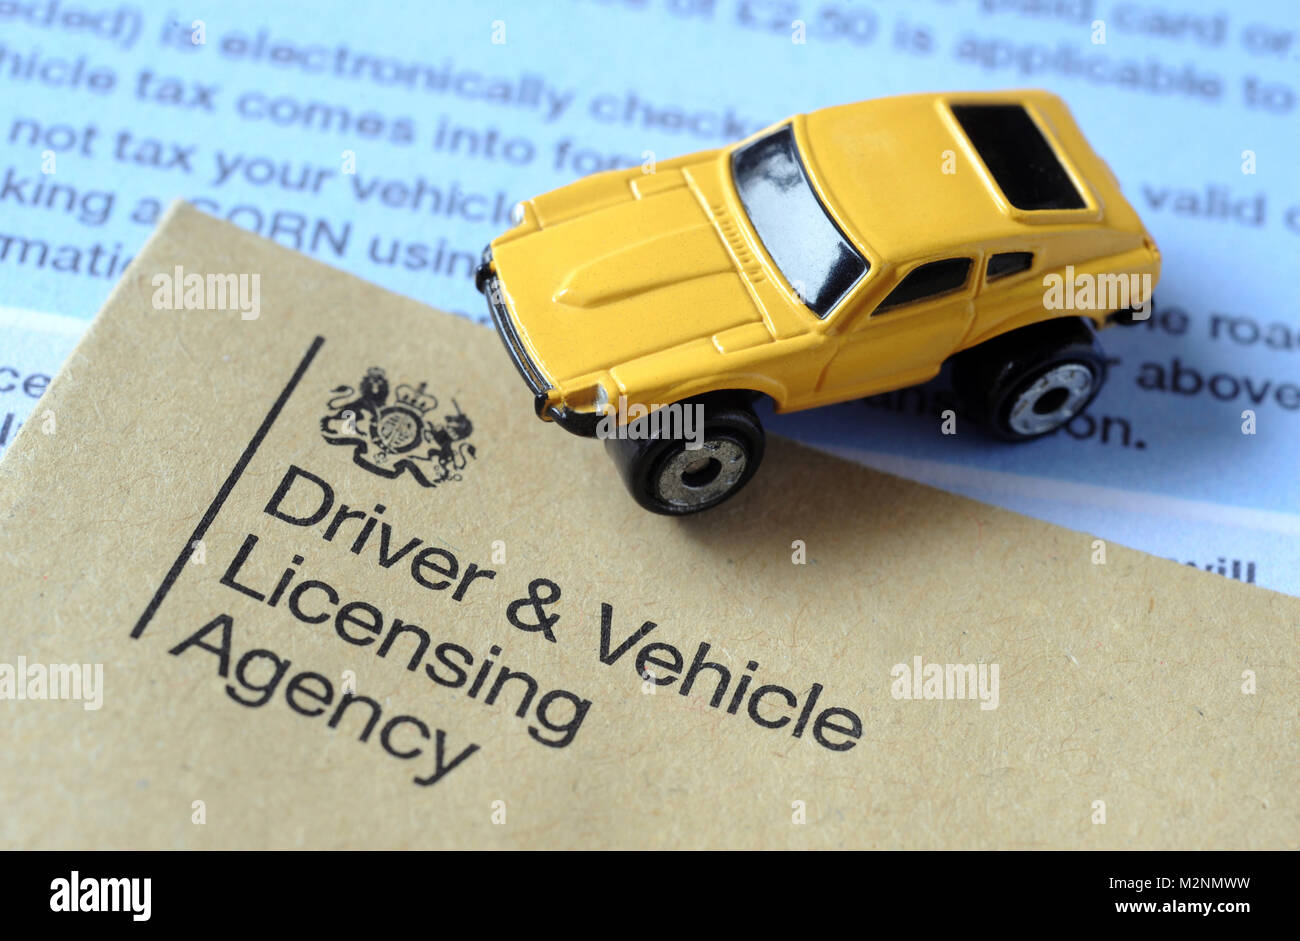 Dvla Literature And Logo With Model Car Re Dvla Driver Vehicle